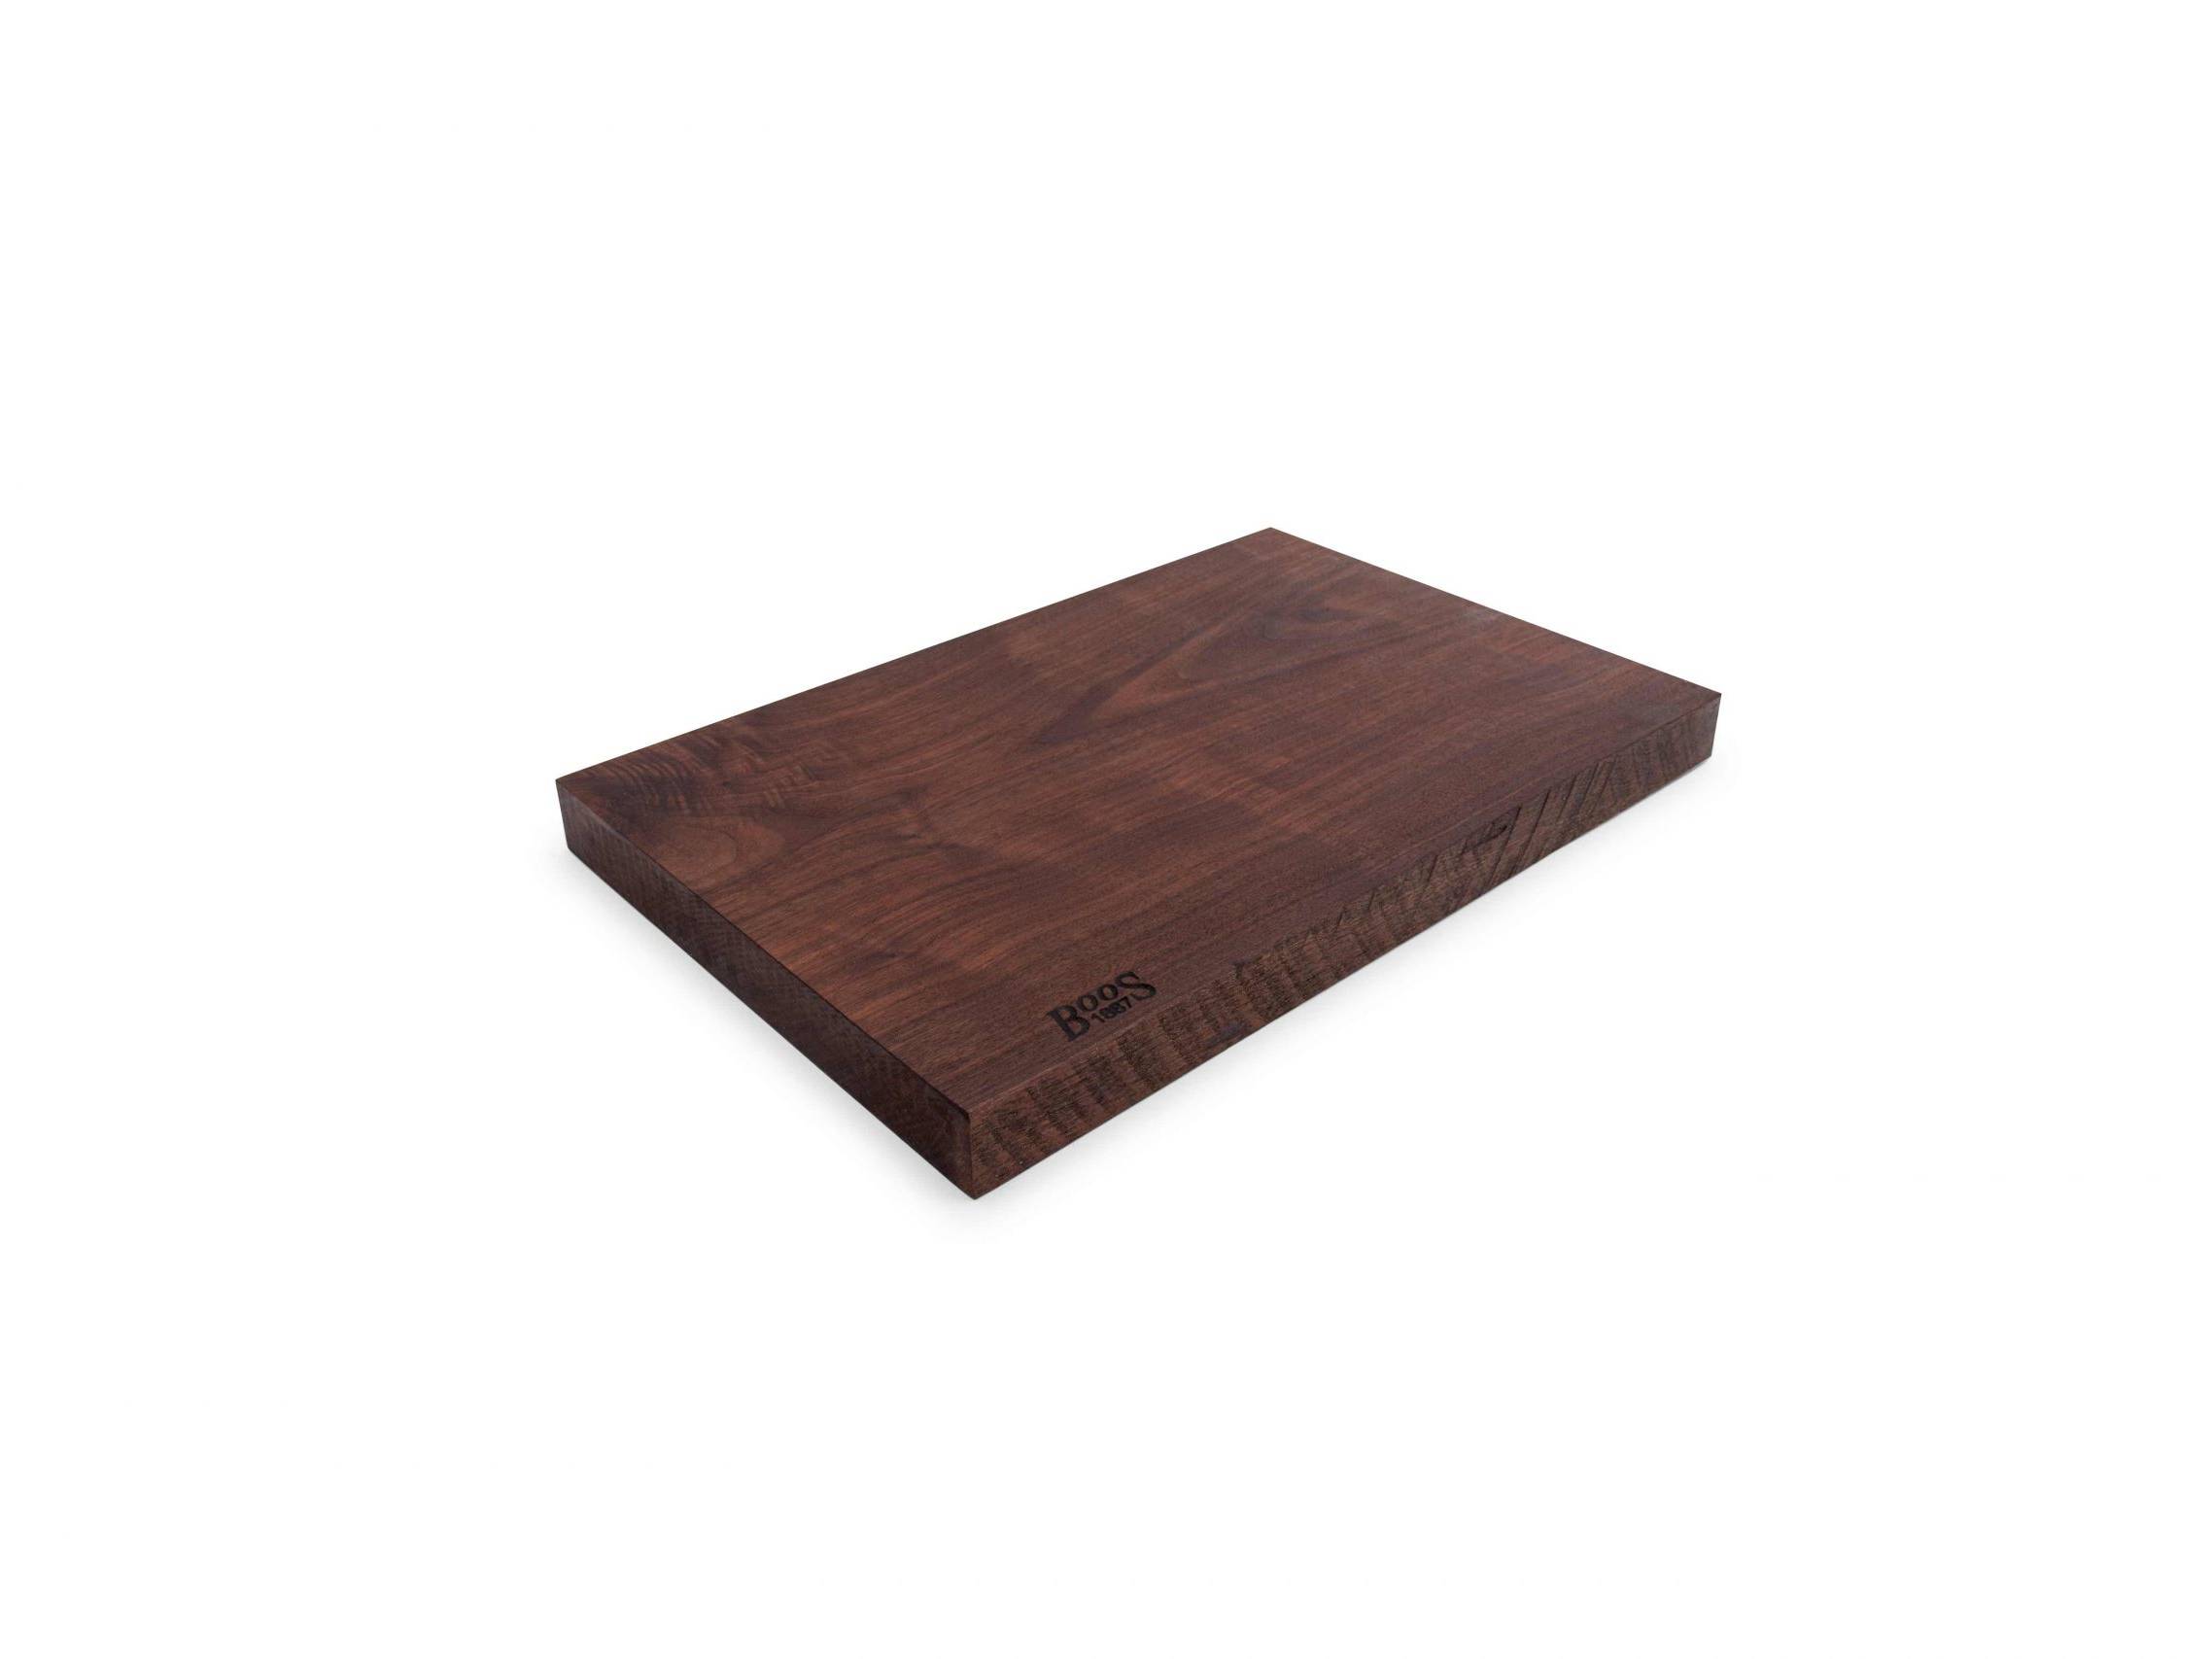 Boos 1887 / Rustic Edge one piece cutting board; Black Walnut; can be used on both sides 43